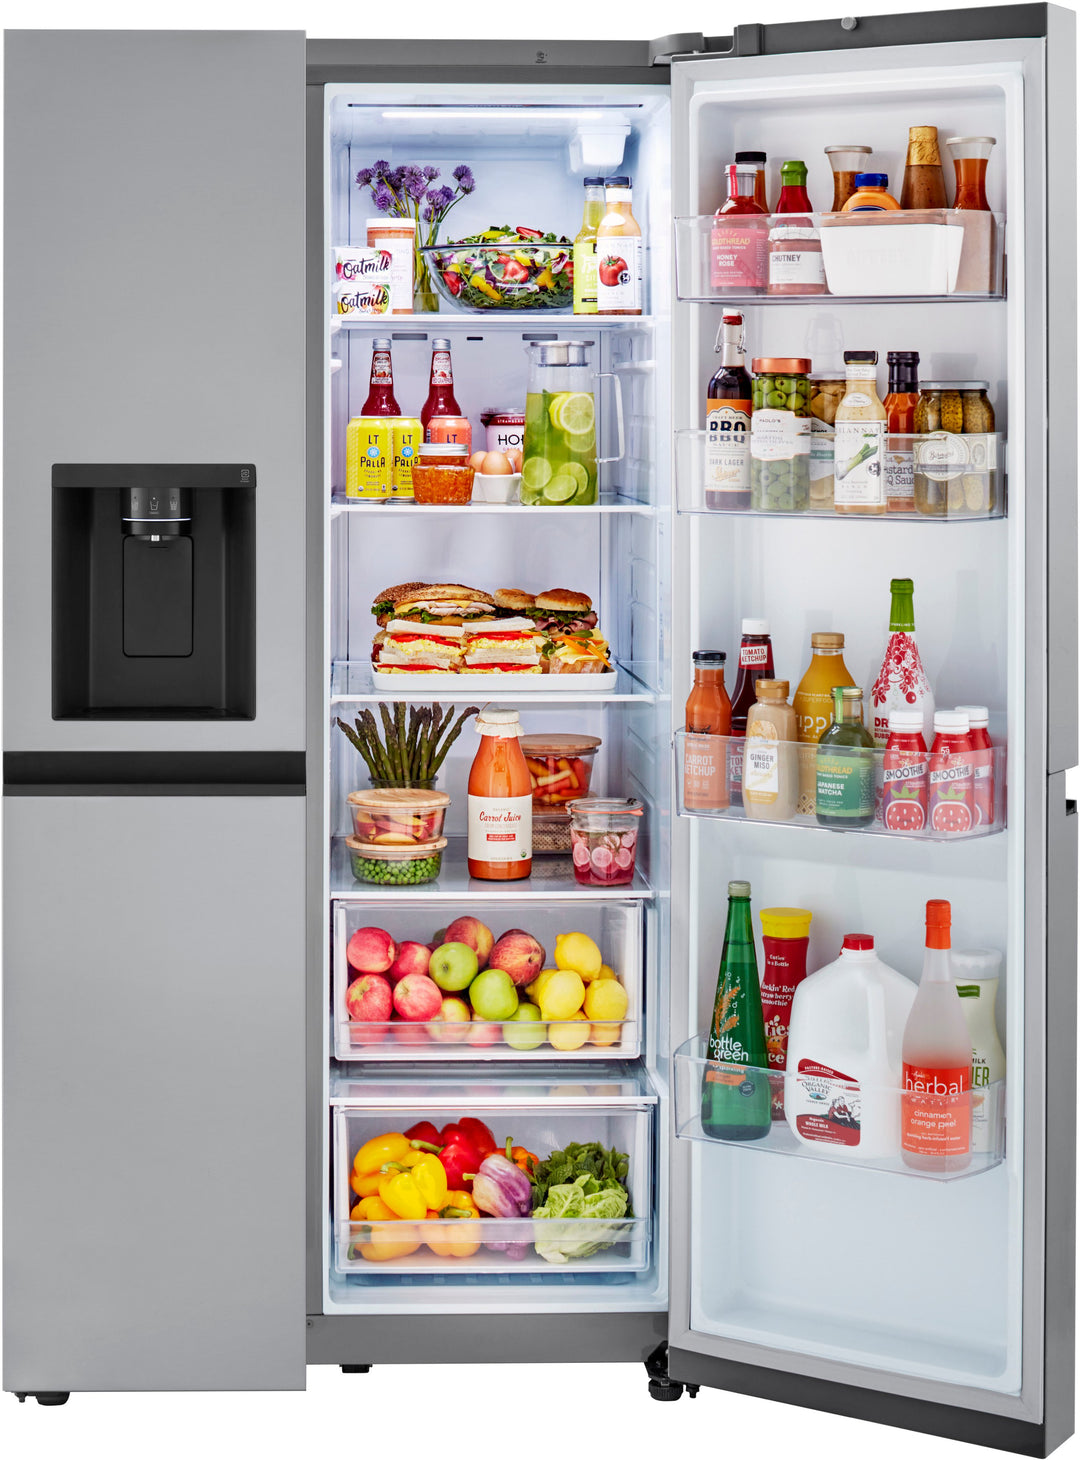 LG - 23 Cu. Ft. Side-by-Side Counter-Depth Refrigerator with Smooth Touch Dispenser - Stainless steel_17